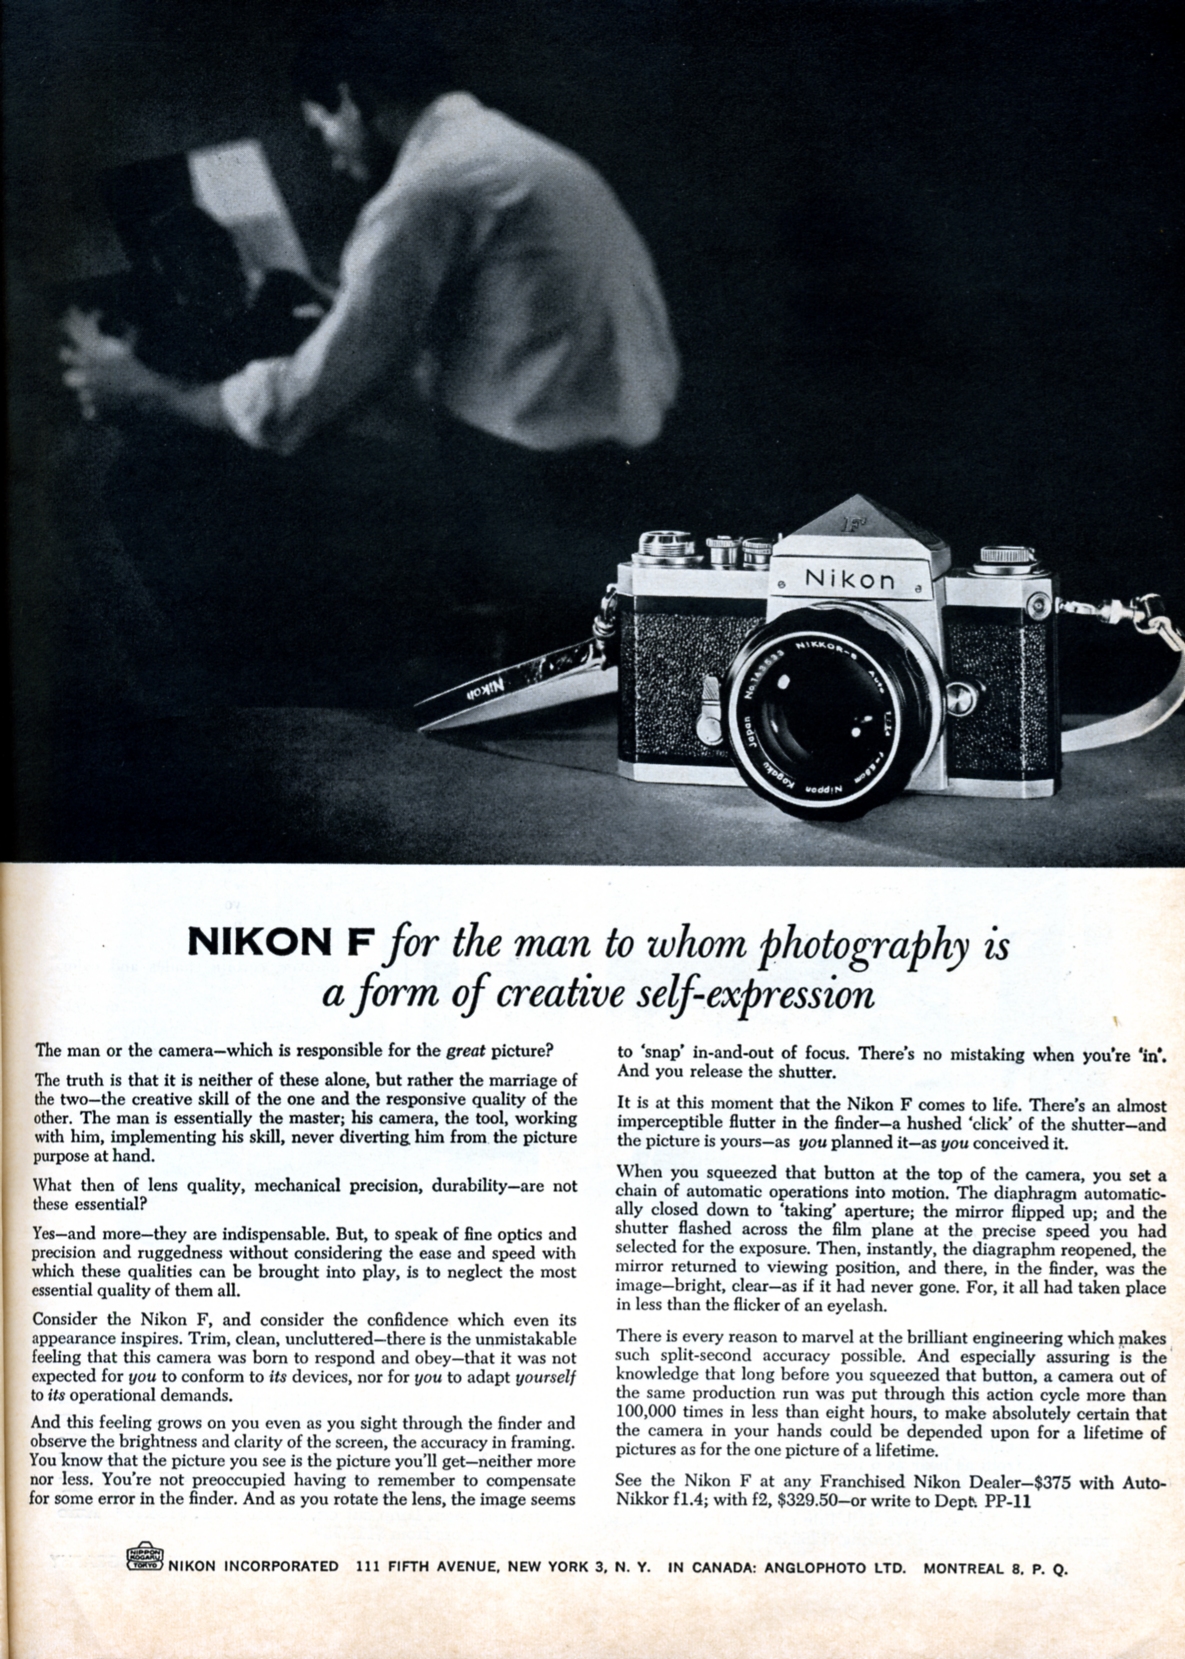 an advertit for the nikon f camera